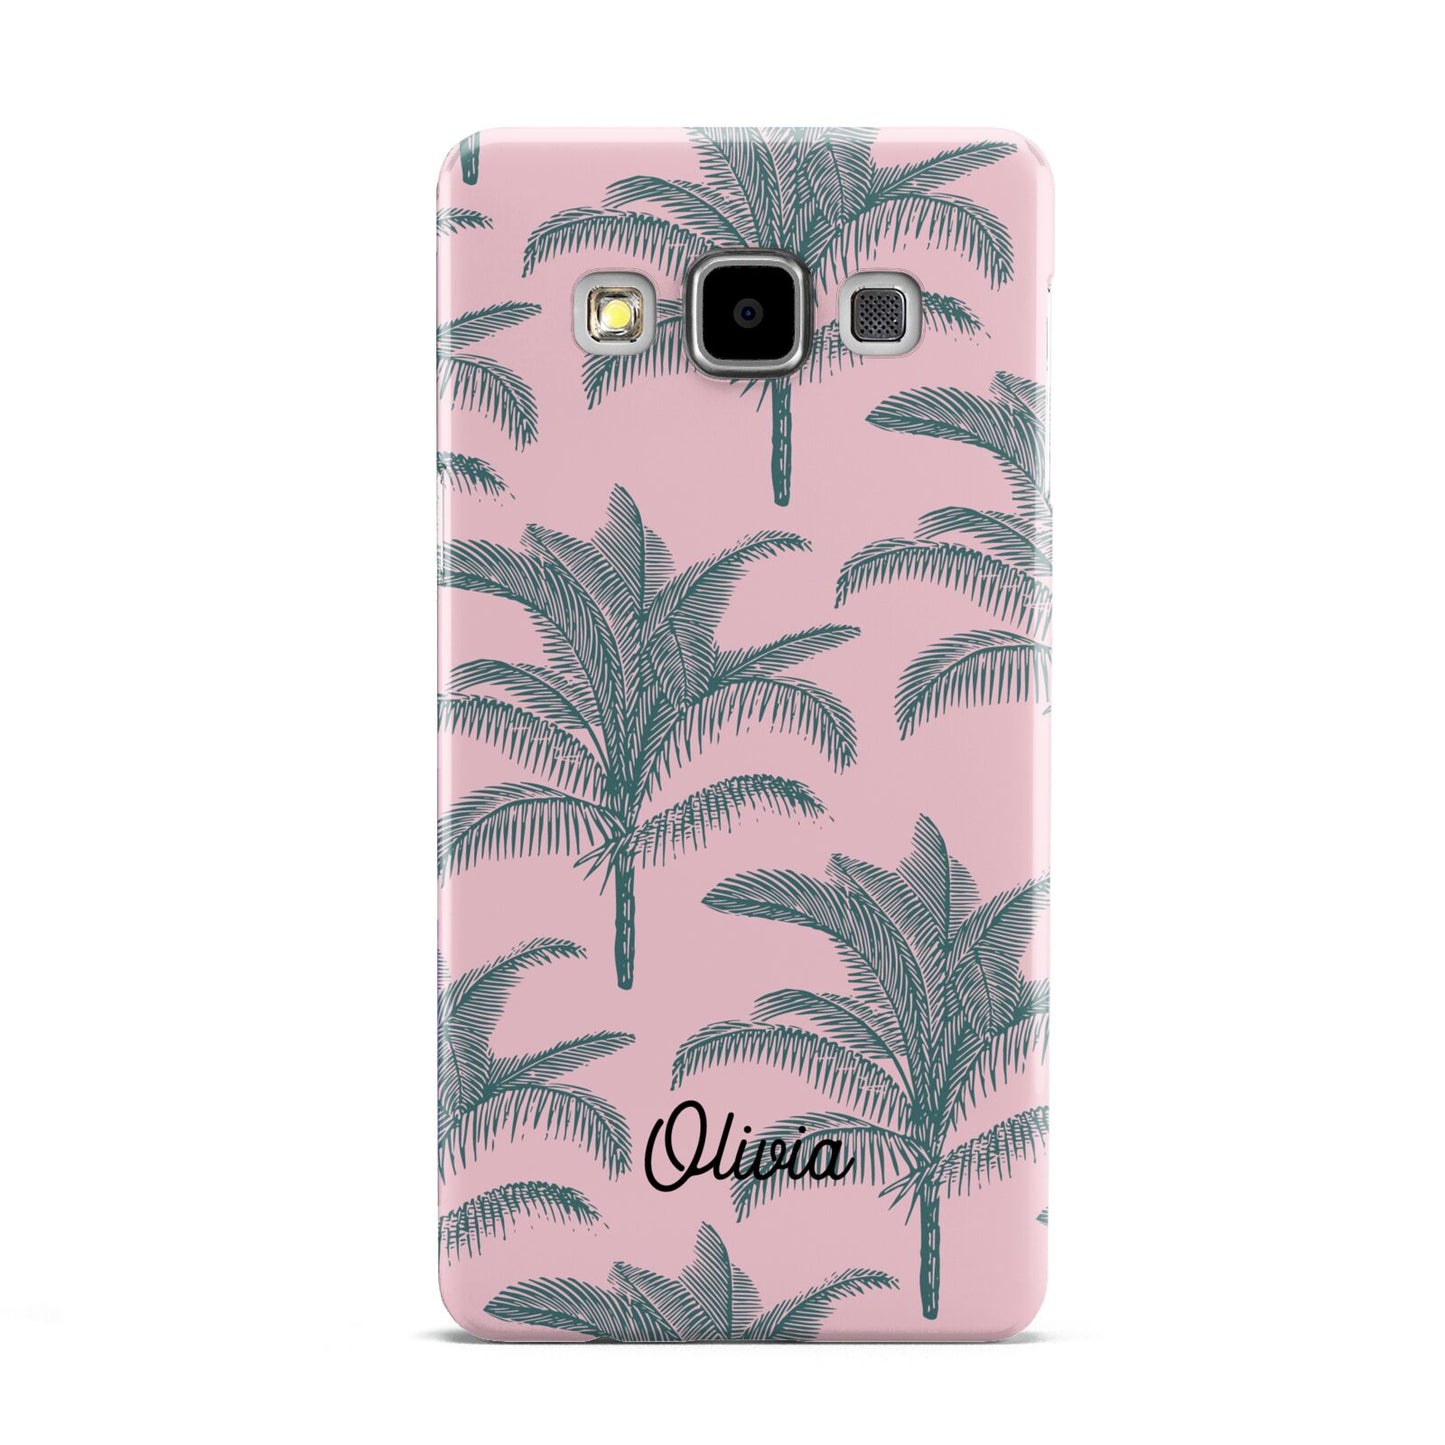 Personalised Palm Samsung Galaxy A5 Case